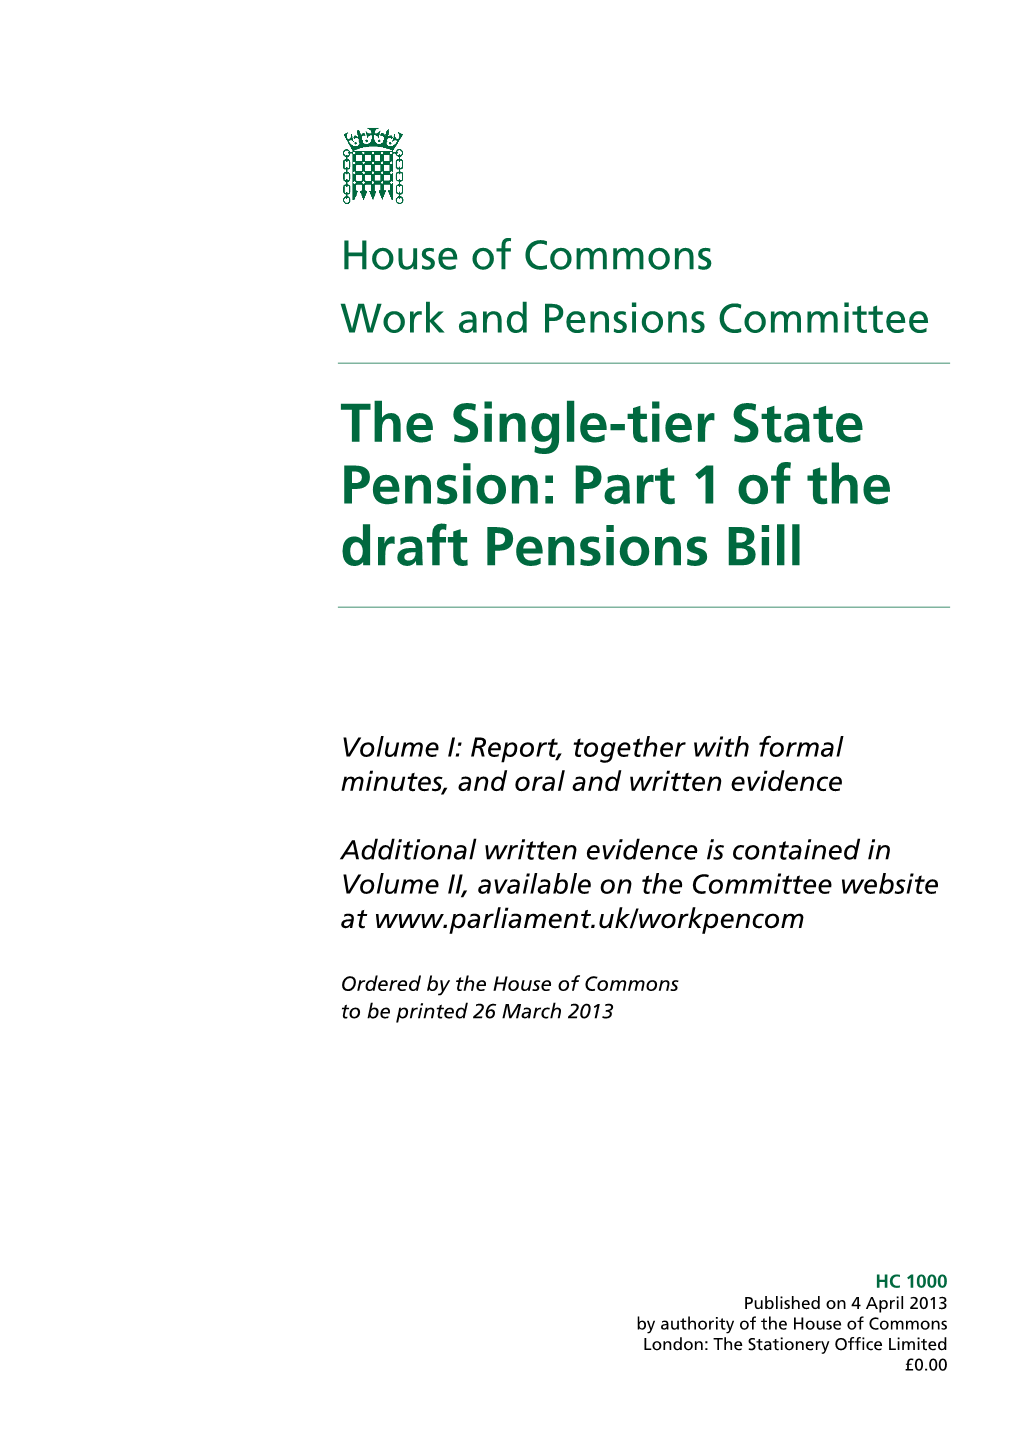 The Single-Tier State Pension: Part 1 of the Draft Pensions Bill